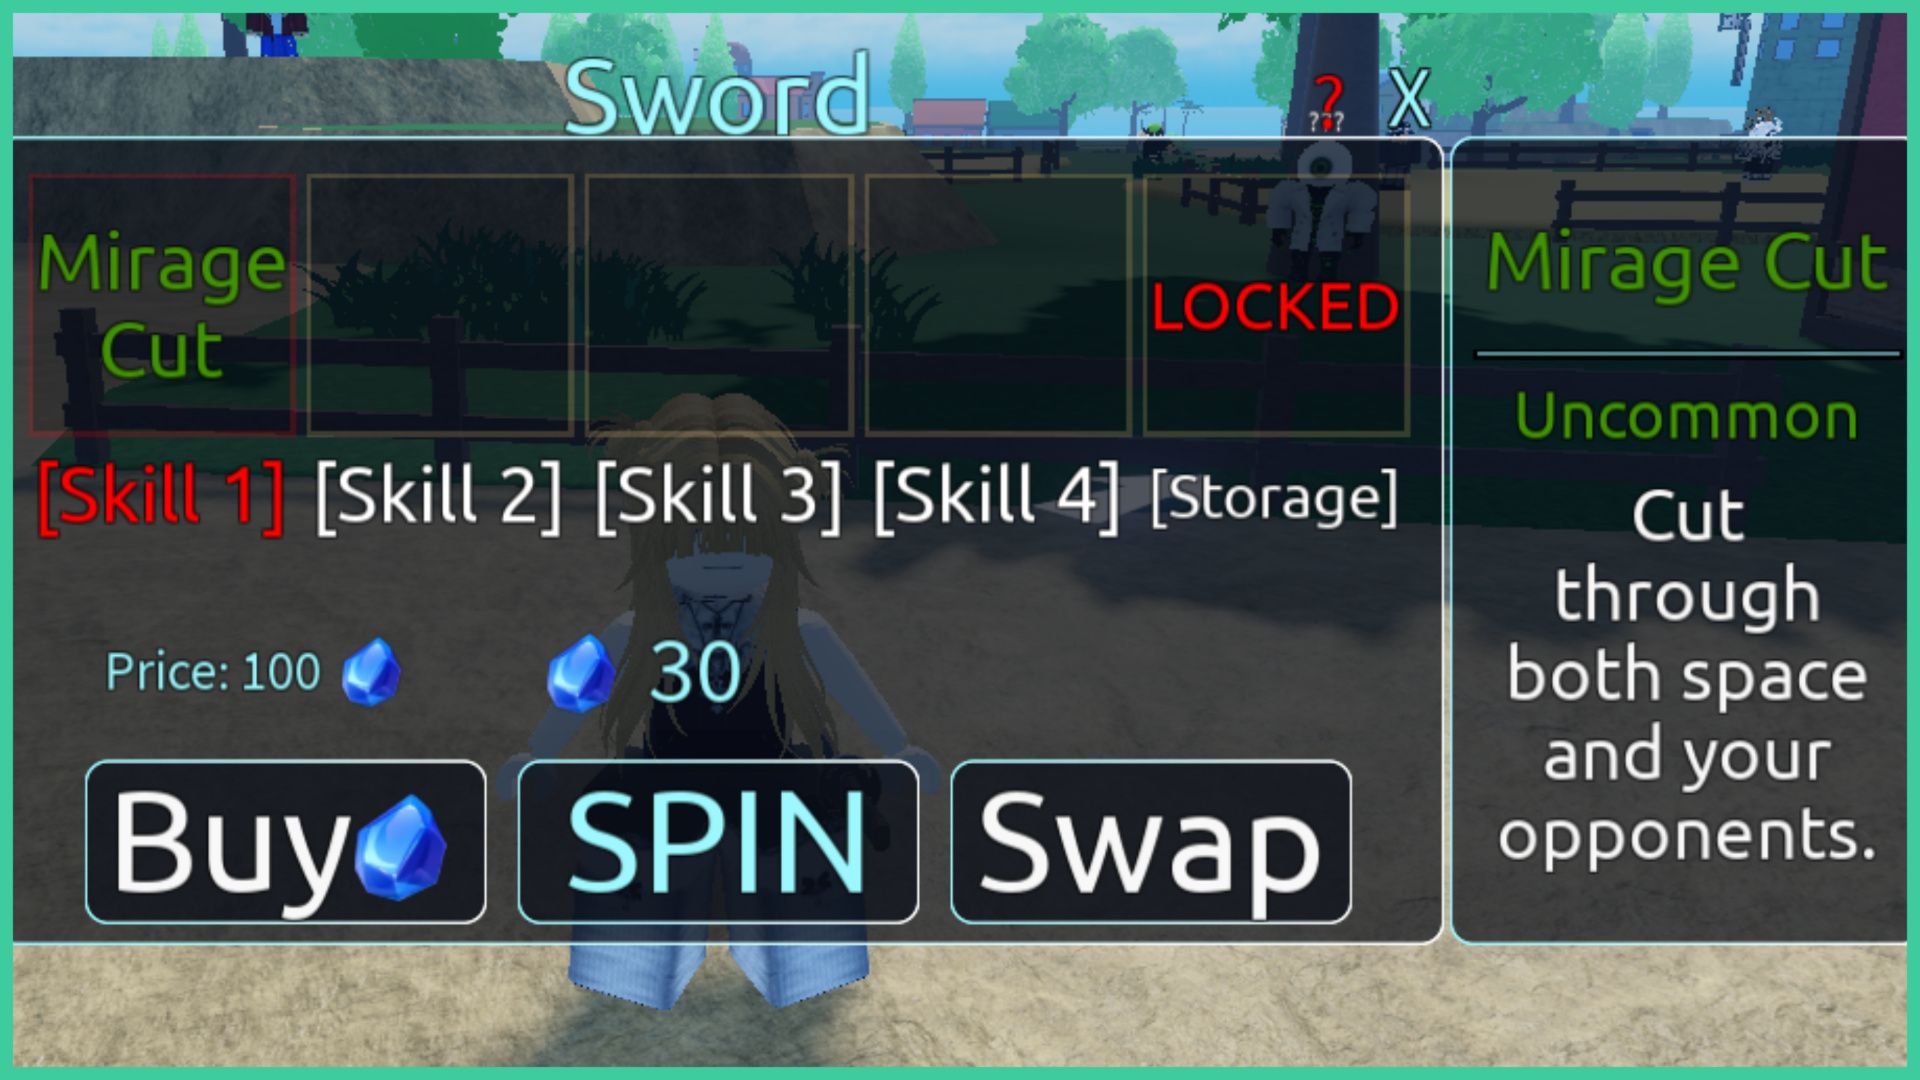 feature image for our cursed sea skills guide, the image is a screenshot of the skills window with the options to buy, spin, or swap skills, there are skill slots, with the left slot taken up by a skill called 'mirage cut' and the skill slot on the right saying 'locked', there is also a description of the mirage cut skill to the right of the window